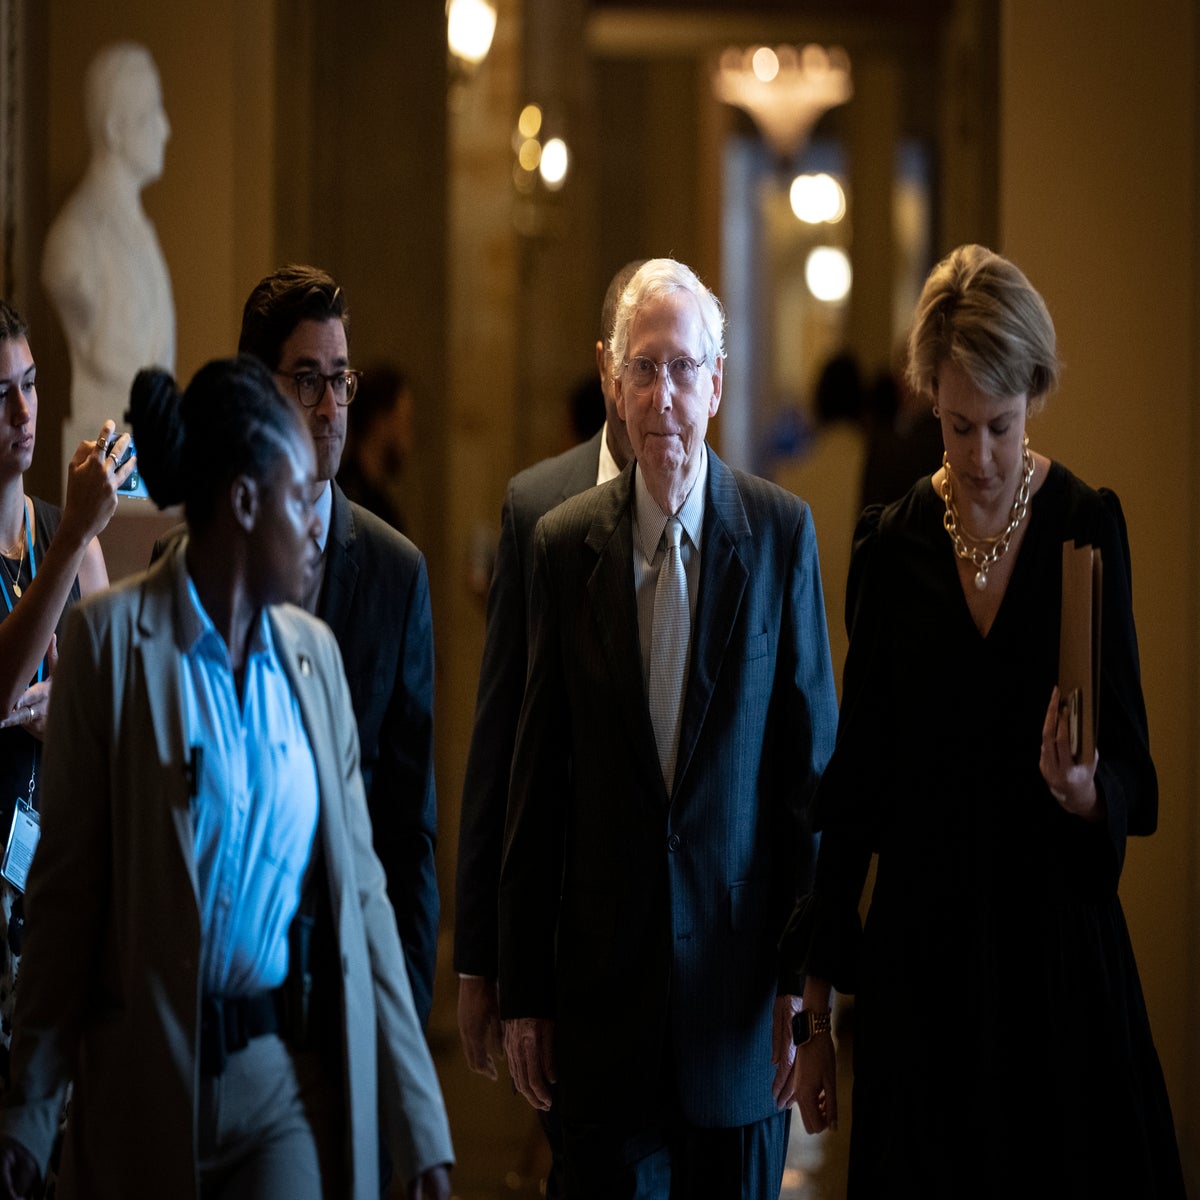 Mitch McConnell appears to freeze up during presser, led away by Senate  colleagues